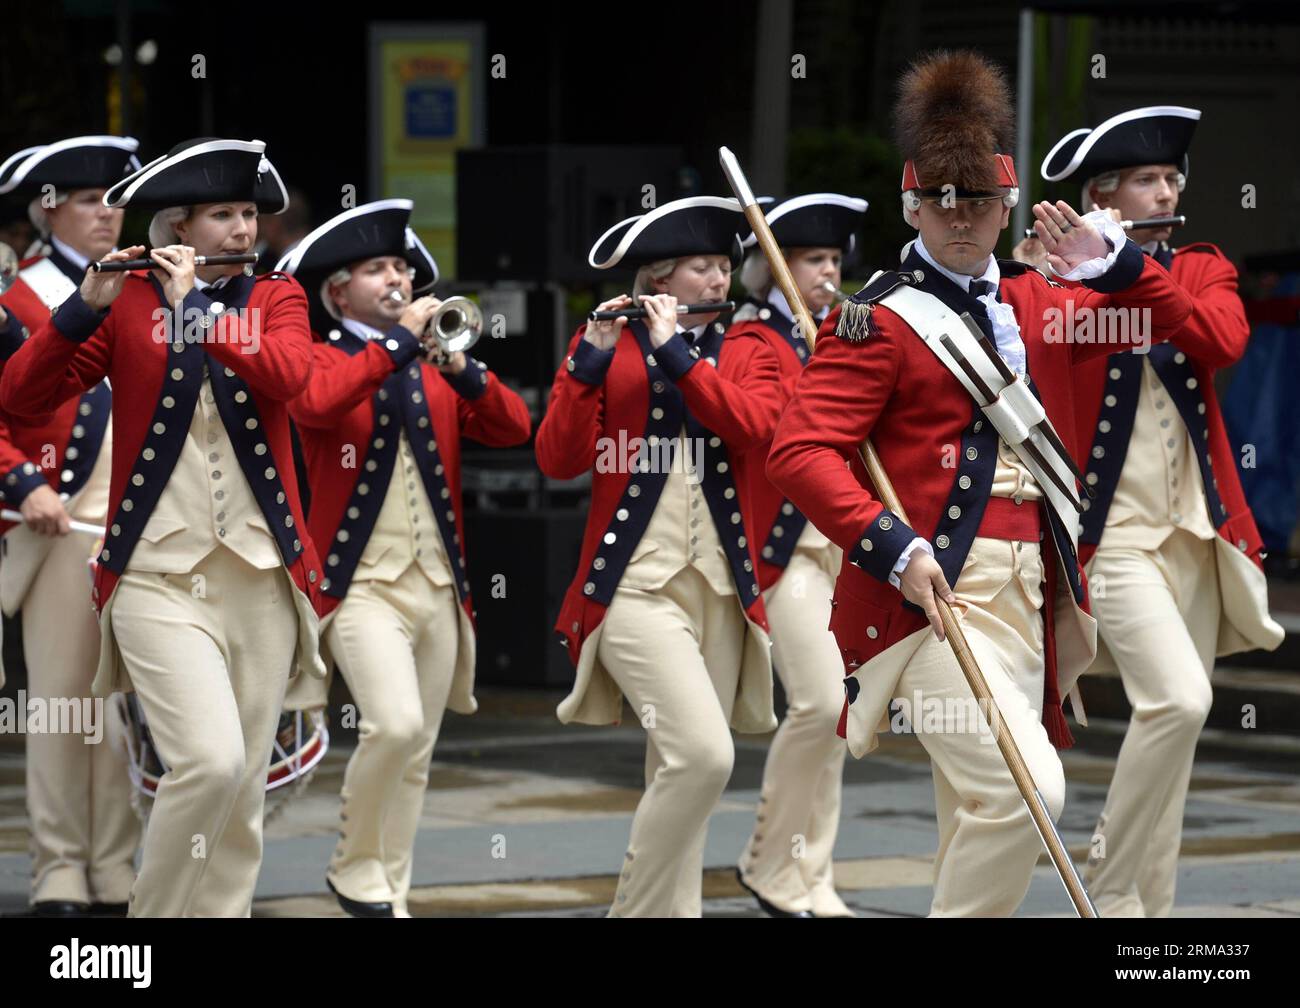 (140613) -- NEW YORK, June 13, 2014 (Xinhua) -- U.S. Army Old Guard Fife and Drum Corps members attend United States Army 239th Birthday Celebration in New York, the United States, on June 13, 2014. The United States Army was founded on June 14, 1775.(Xinhua/Wang Lei) U.S.-NEW YORK-ARMY BIRTHDAY CELEBRATION PUBLICATIONxNOTxINxCHN   New York June 13 2014 XINHUA U S Army Old Guard Fife and Drum Corps Members attend United States Army  Birthday Celebration in New York The United States ON June 13 2014 The United States Army what Founded ON June 14 1775 XINHUA Wang Lei U S New York Army Birthday C Stock Photo